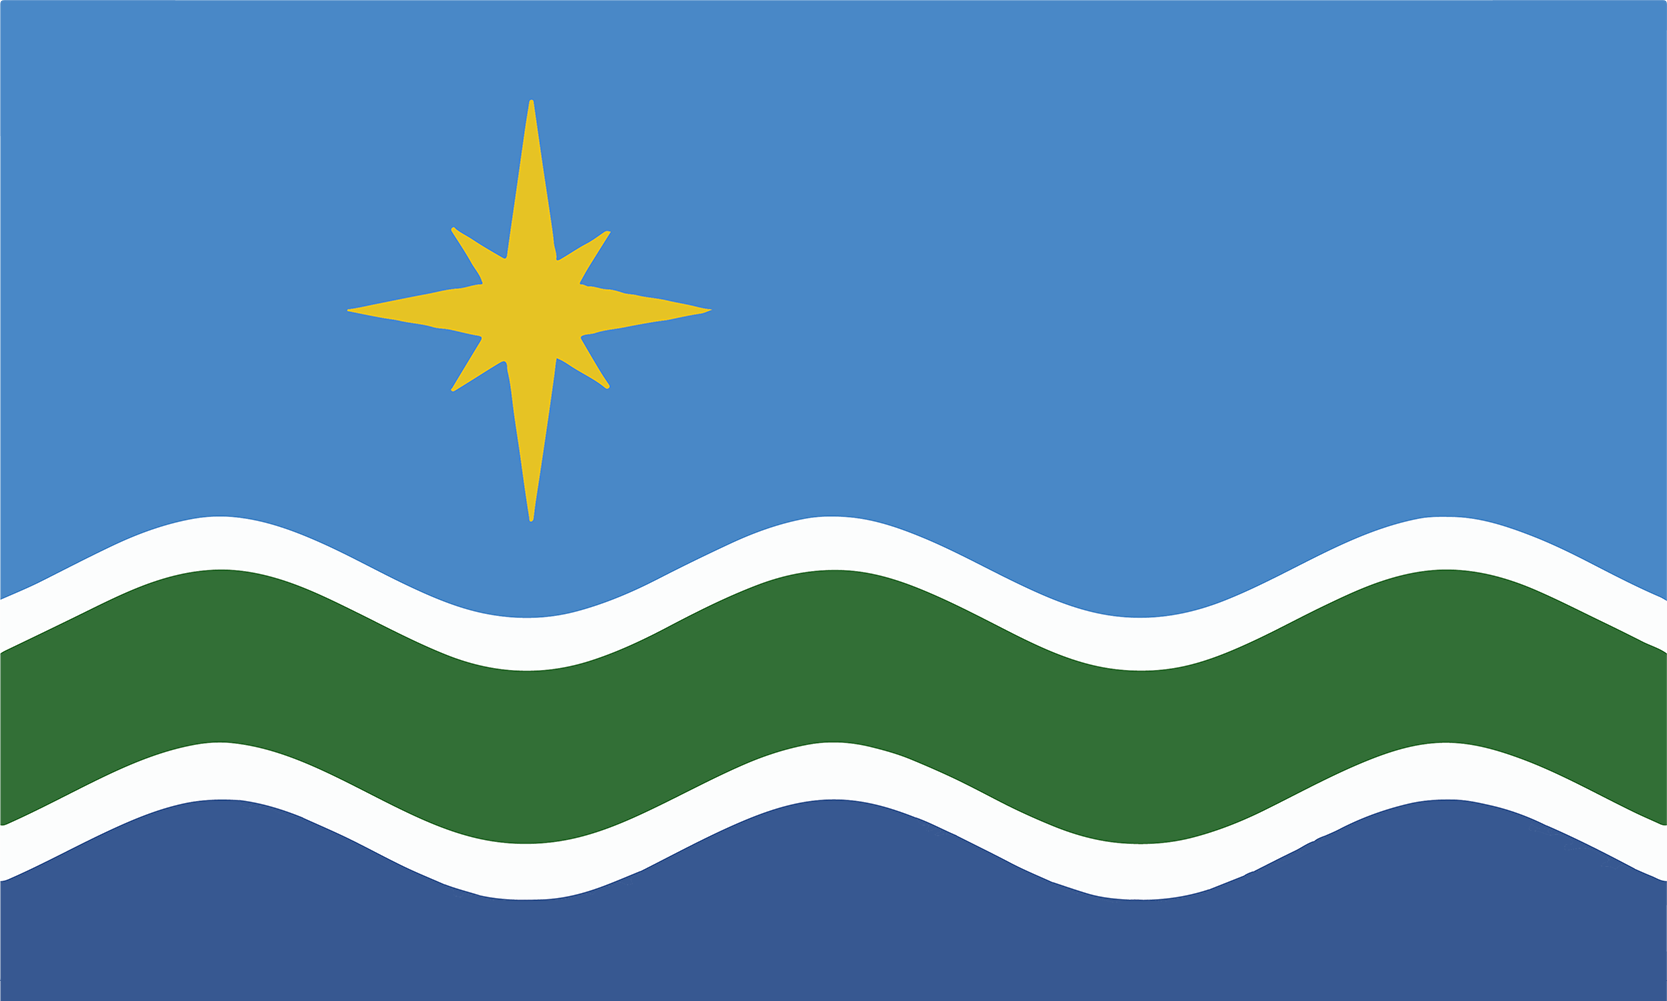 The Flag of Duluth